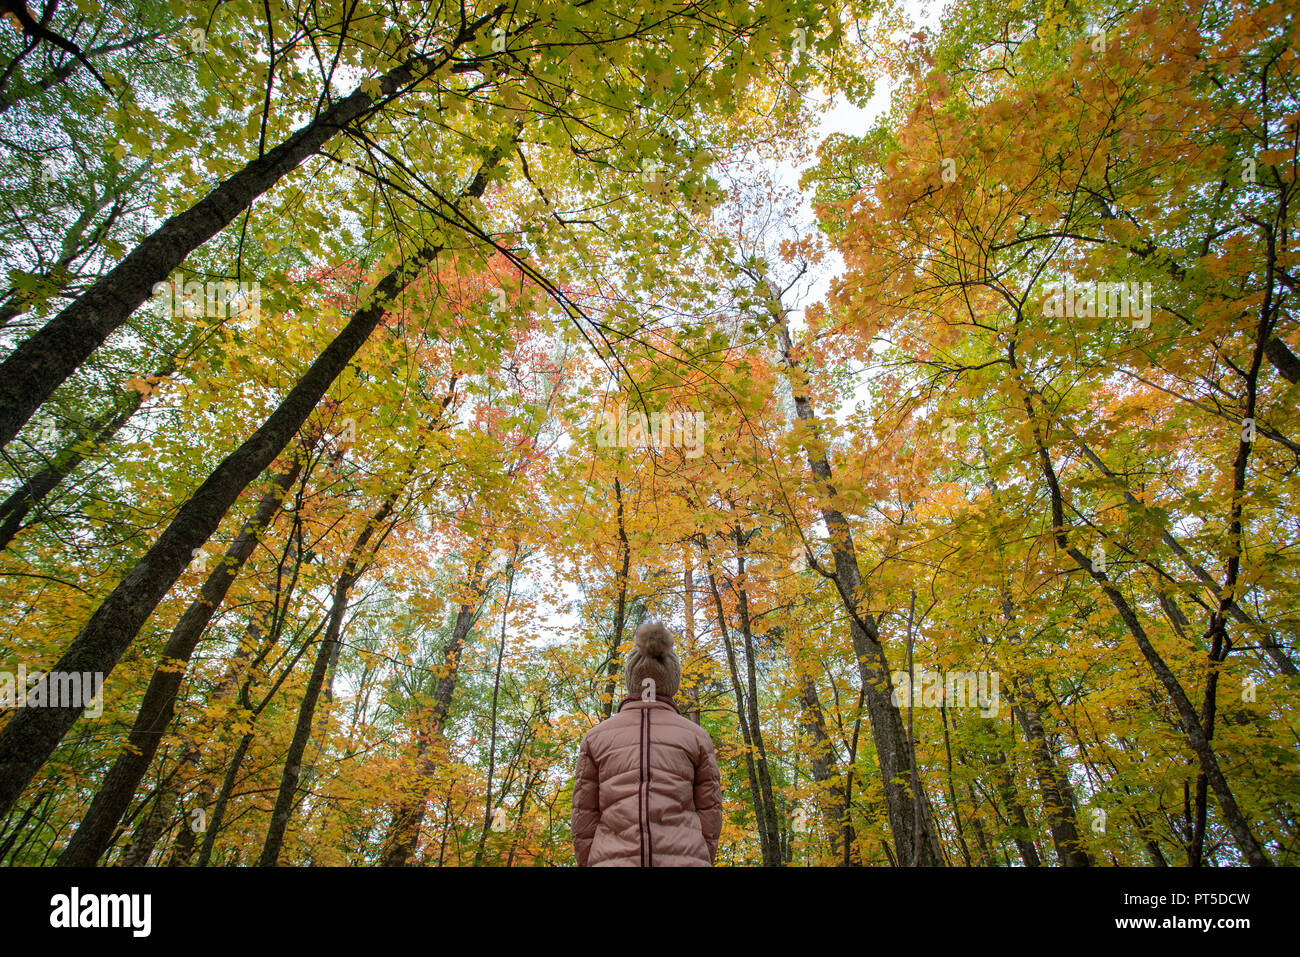 Low angle view of a girl looking up on colorful trees during fall foliage Stock Photo